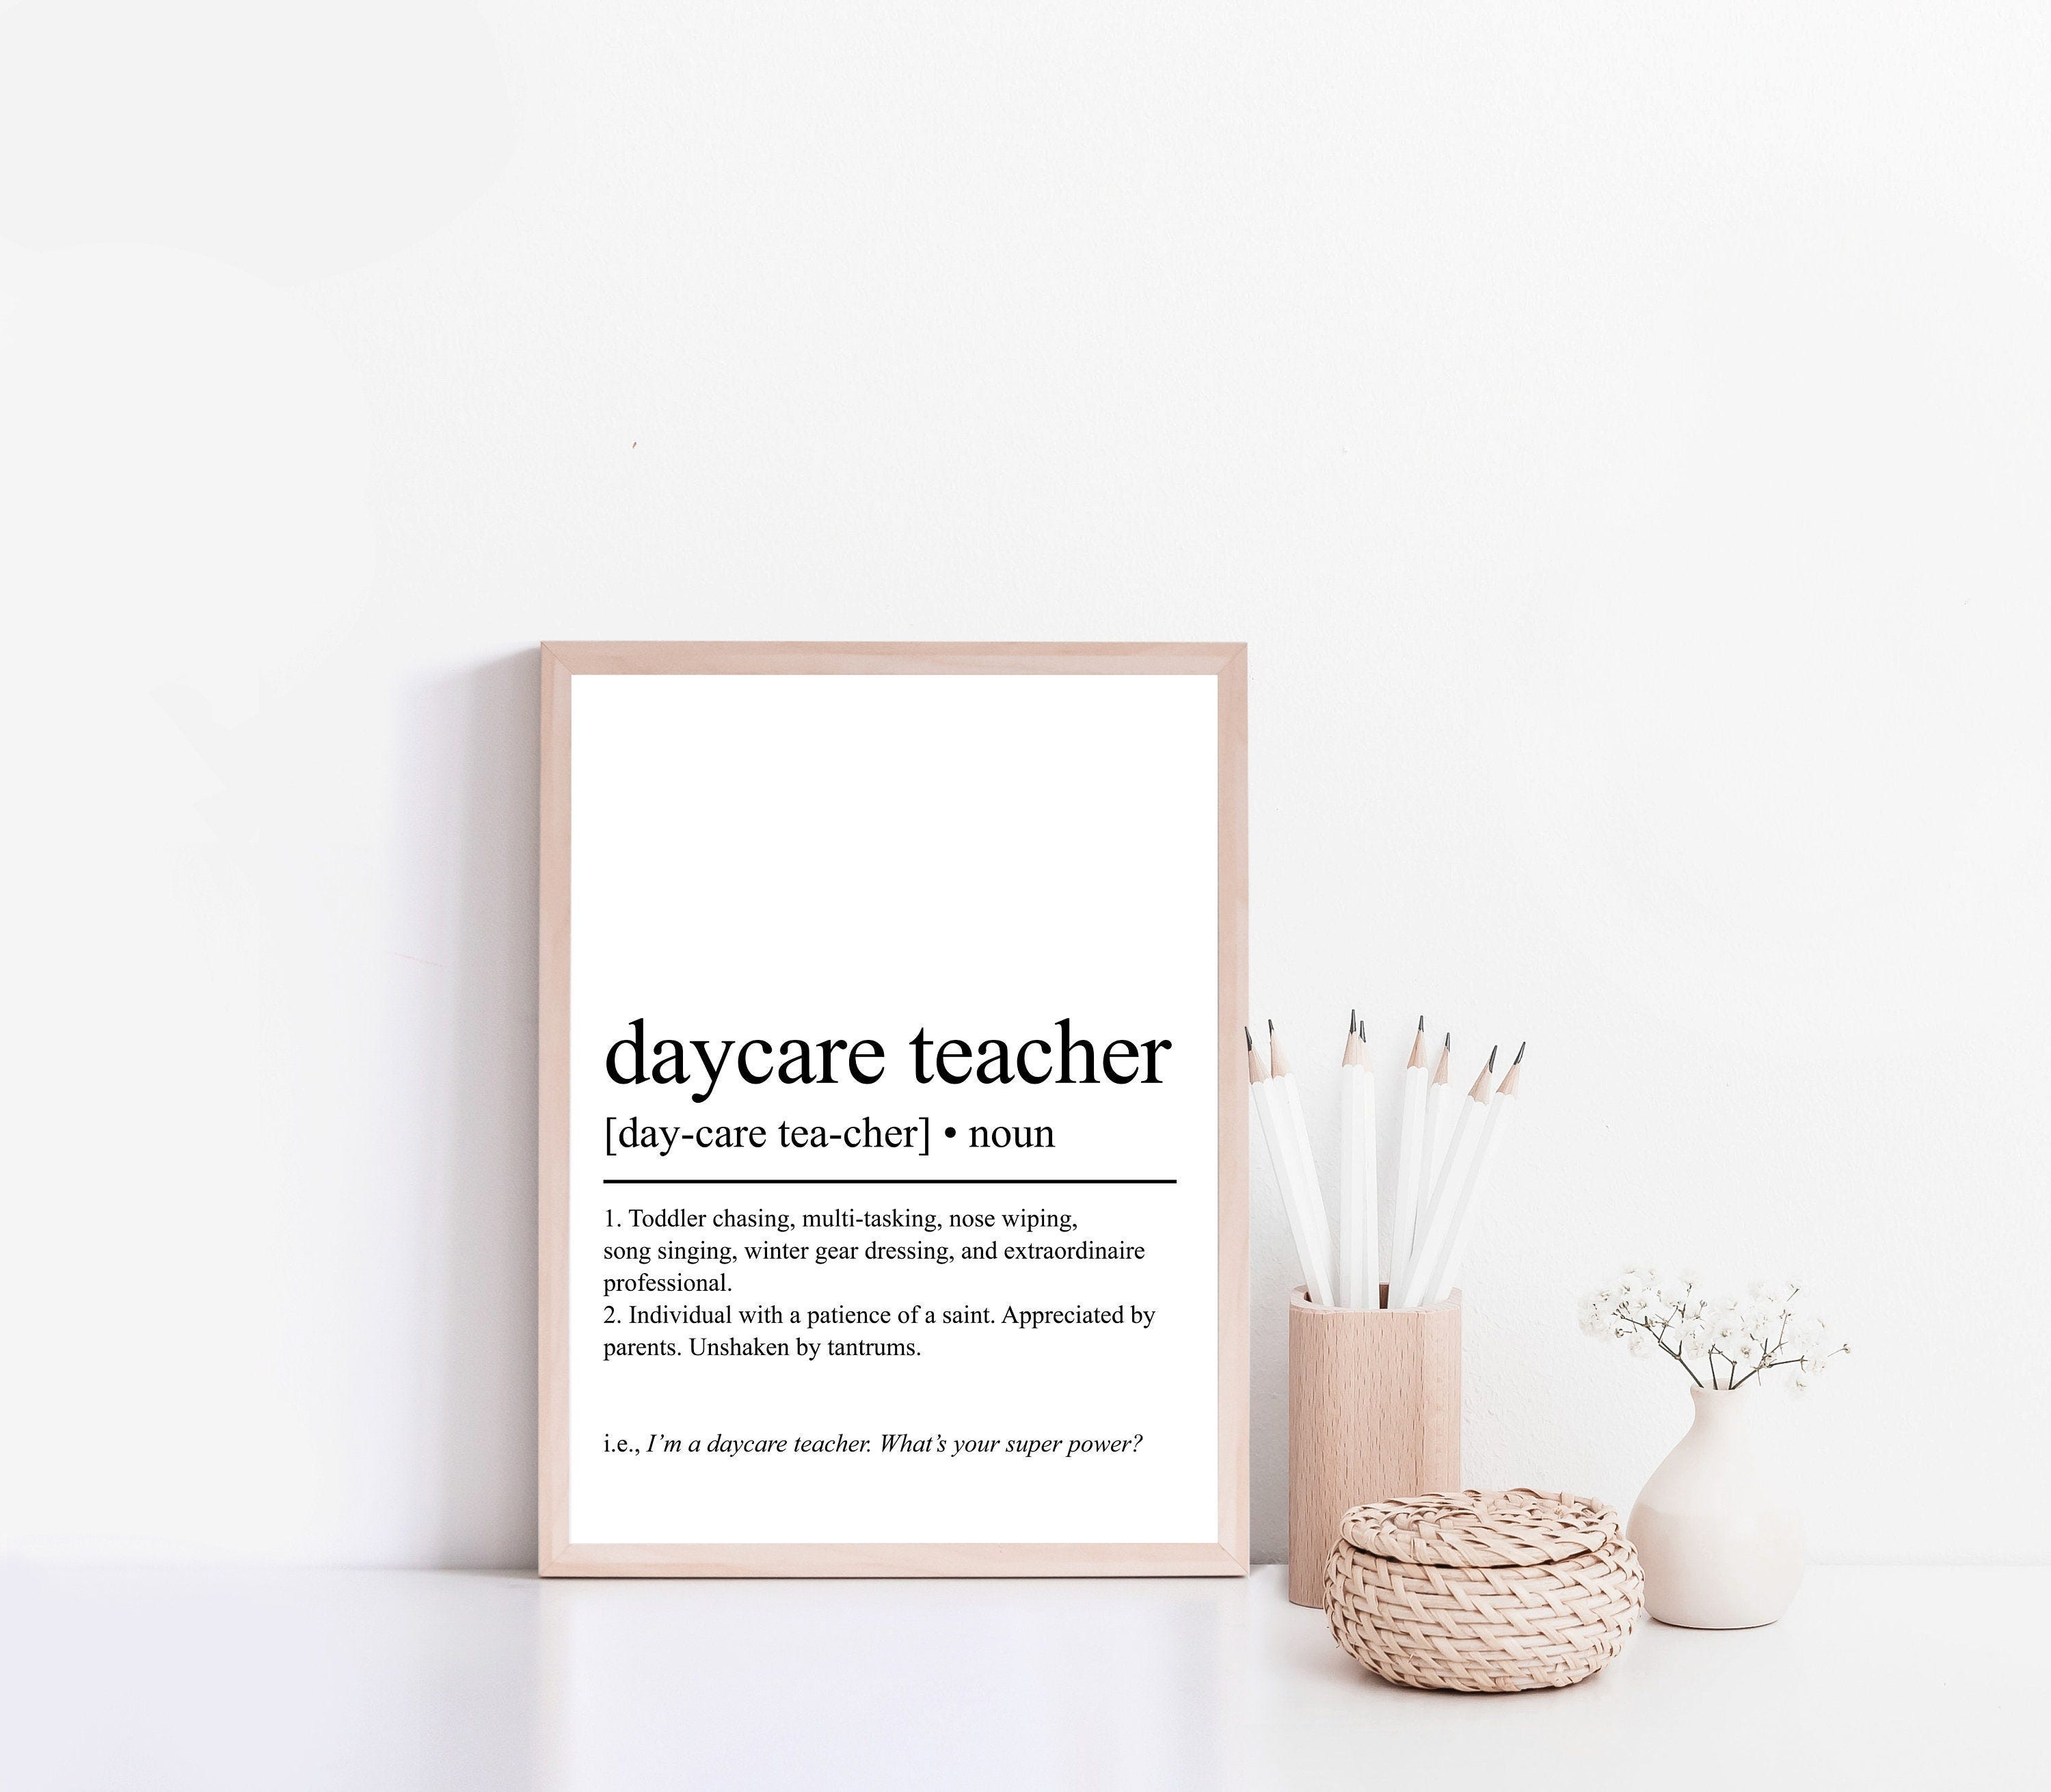 Daycare teacher definition print, typography print, funny print, daycare print, home decor, teacher appretiation gift, gift for teacher